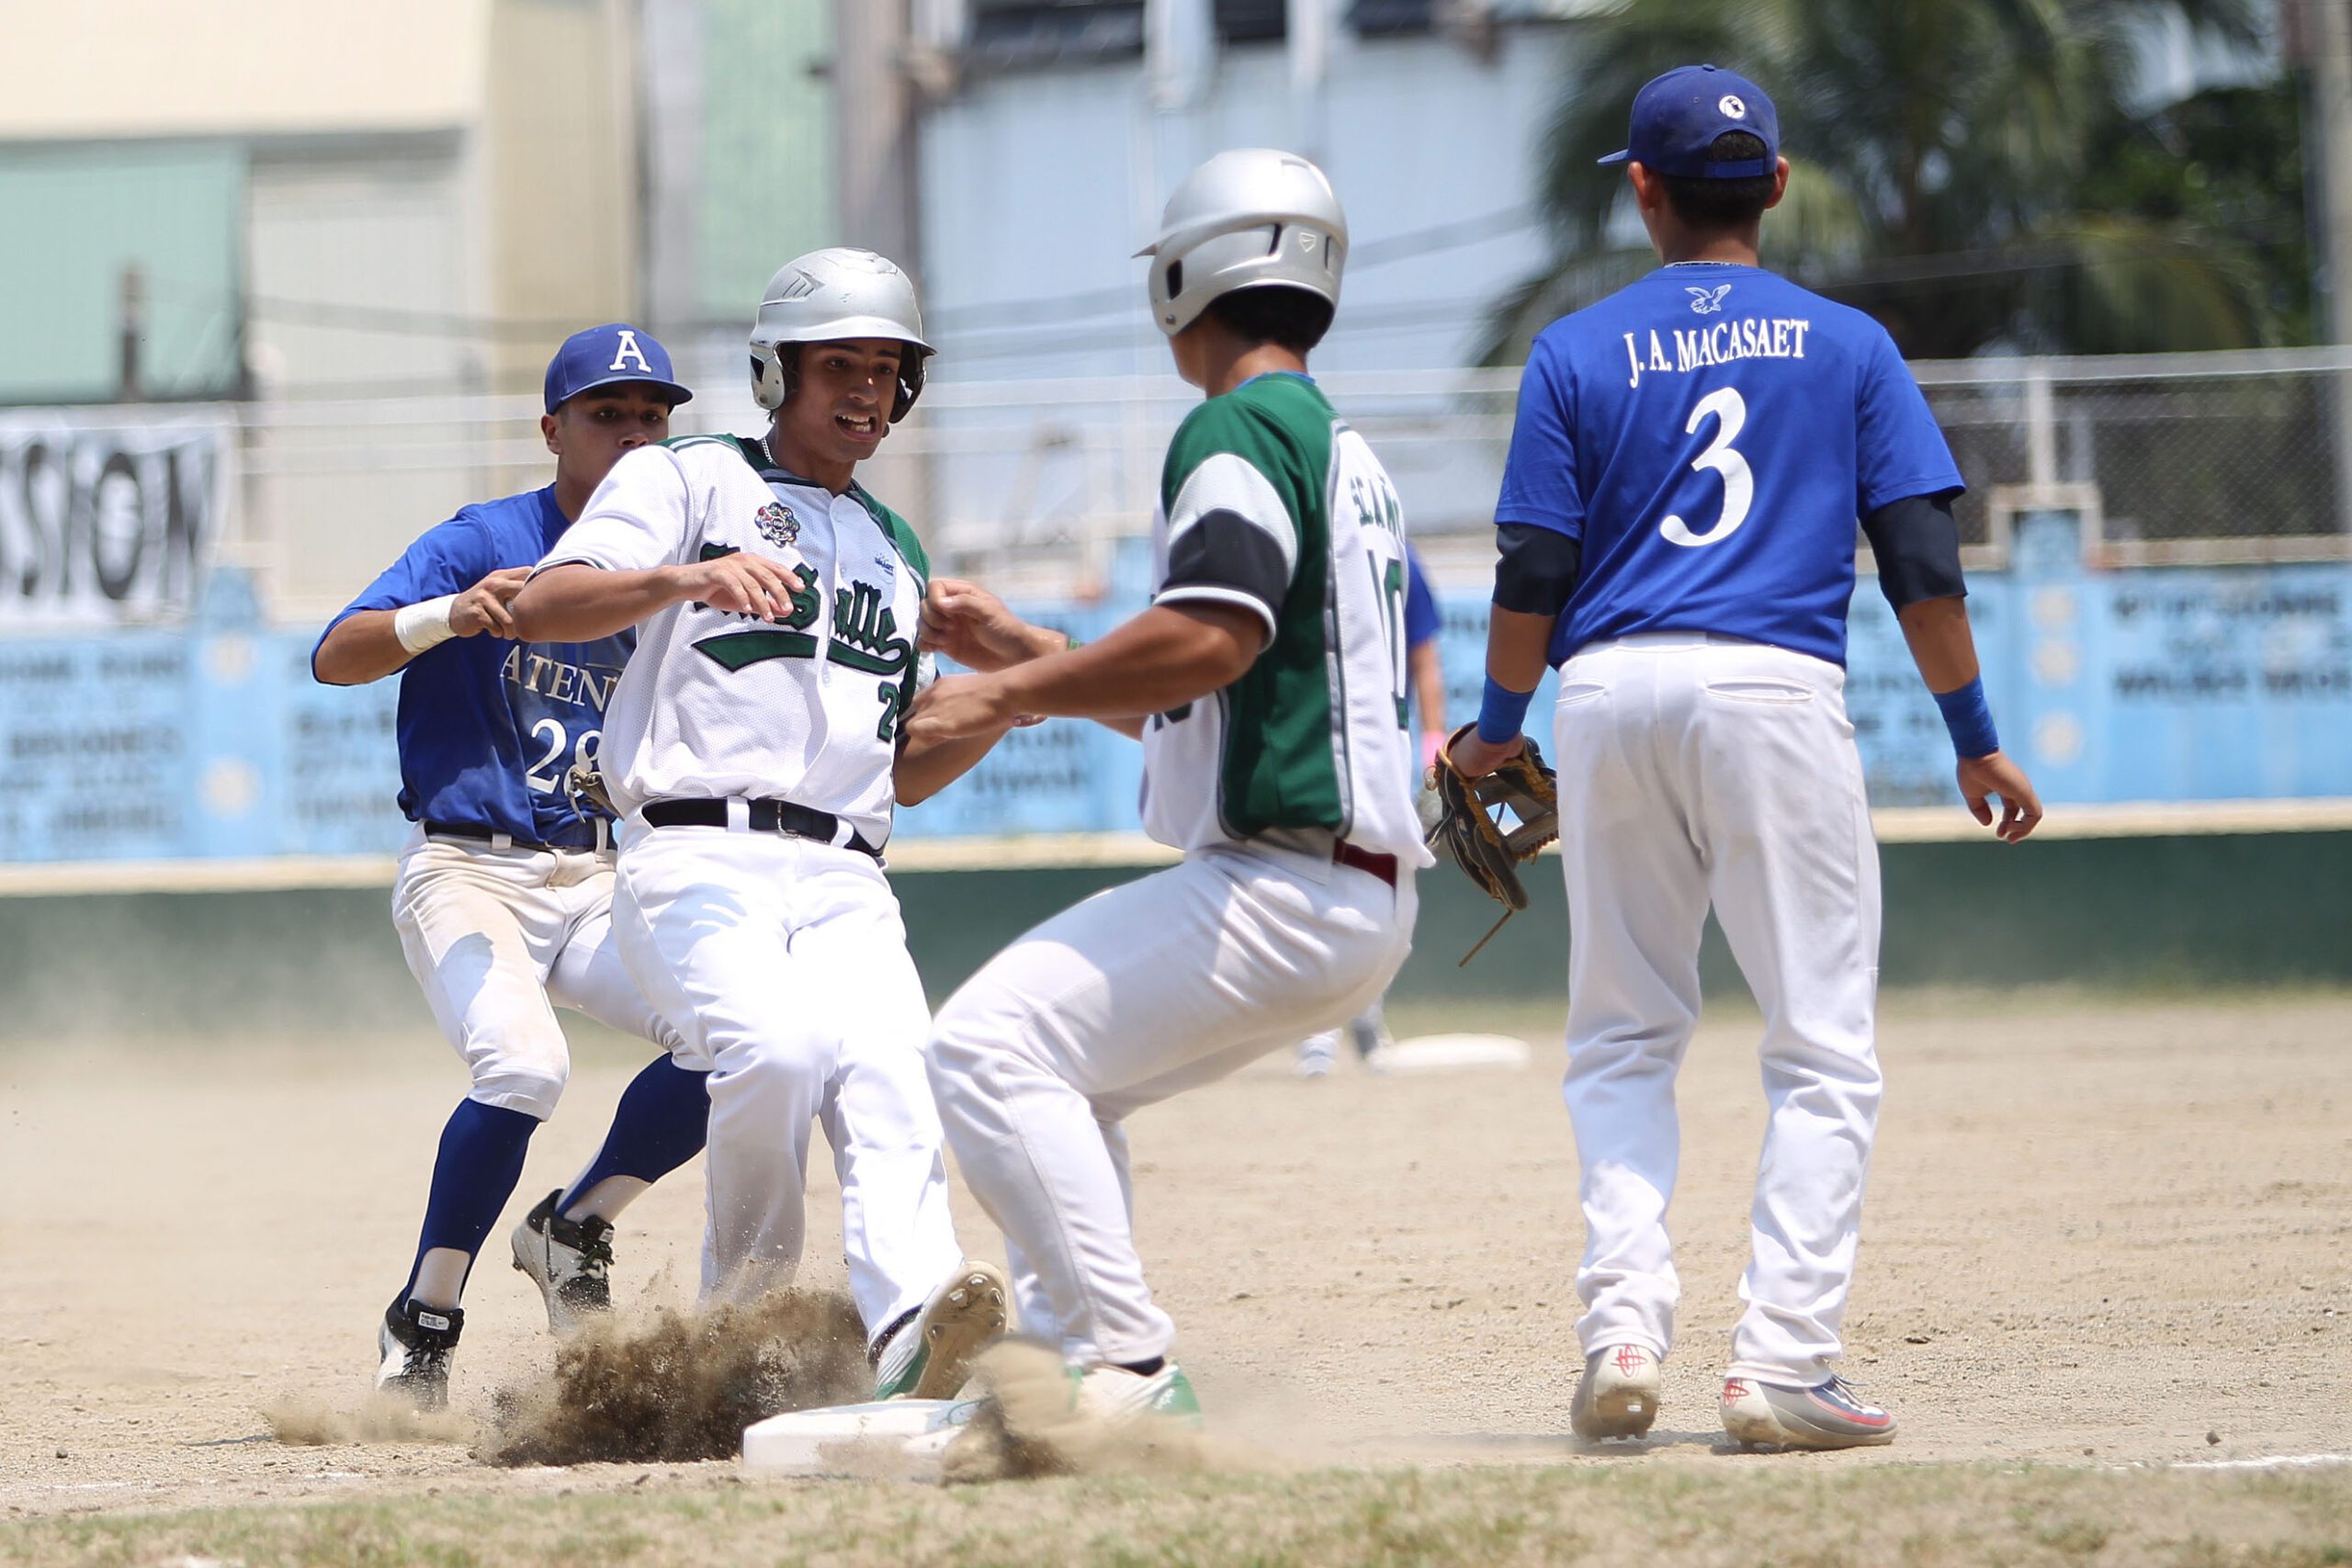 La Salle beats Ateneo to end 13-year baseball title drought